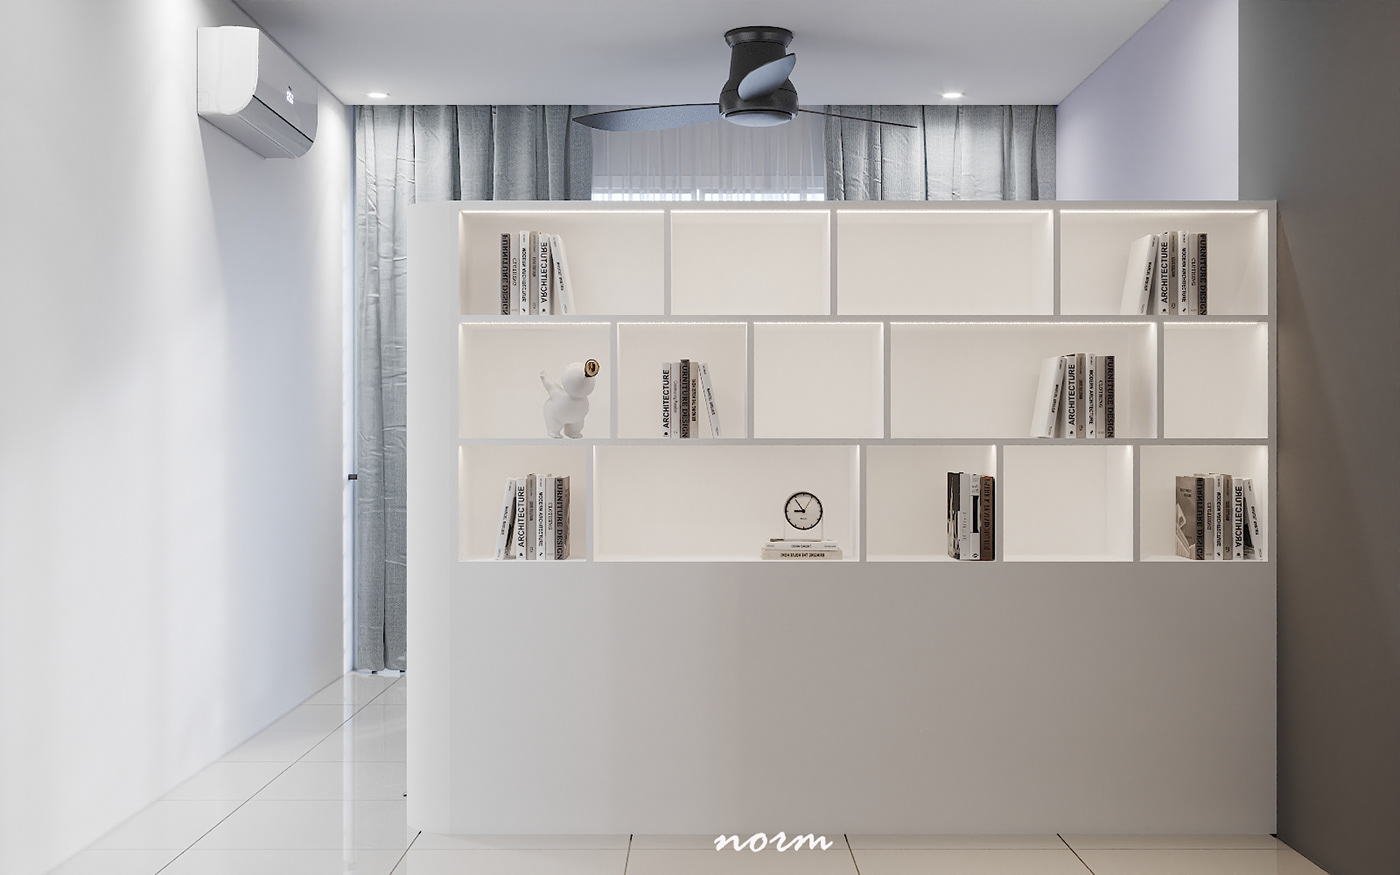 In this space, a large white bookshelf with a minimalist warm light system is the ideal choice. Despite its simplicity, the sophistication emanating from its structure and color it possesses can still attract people's attention.